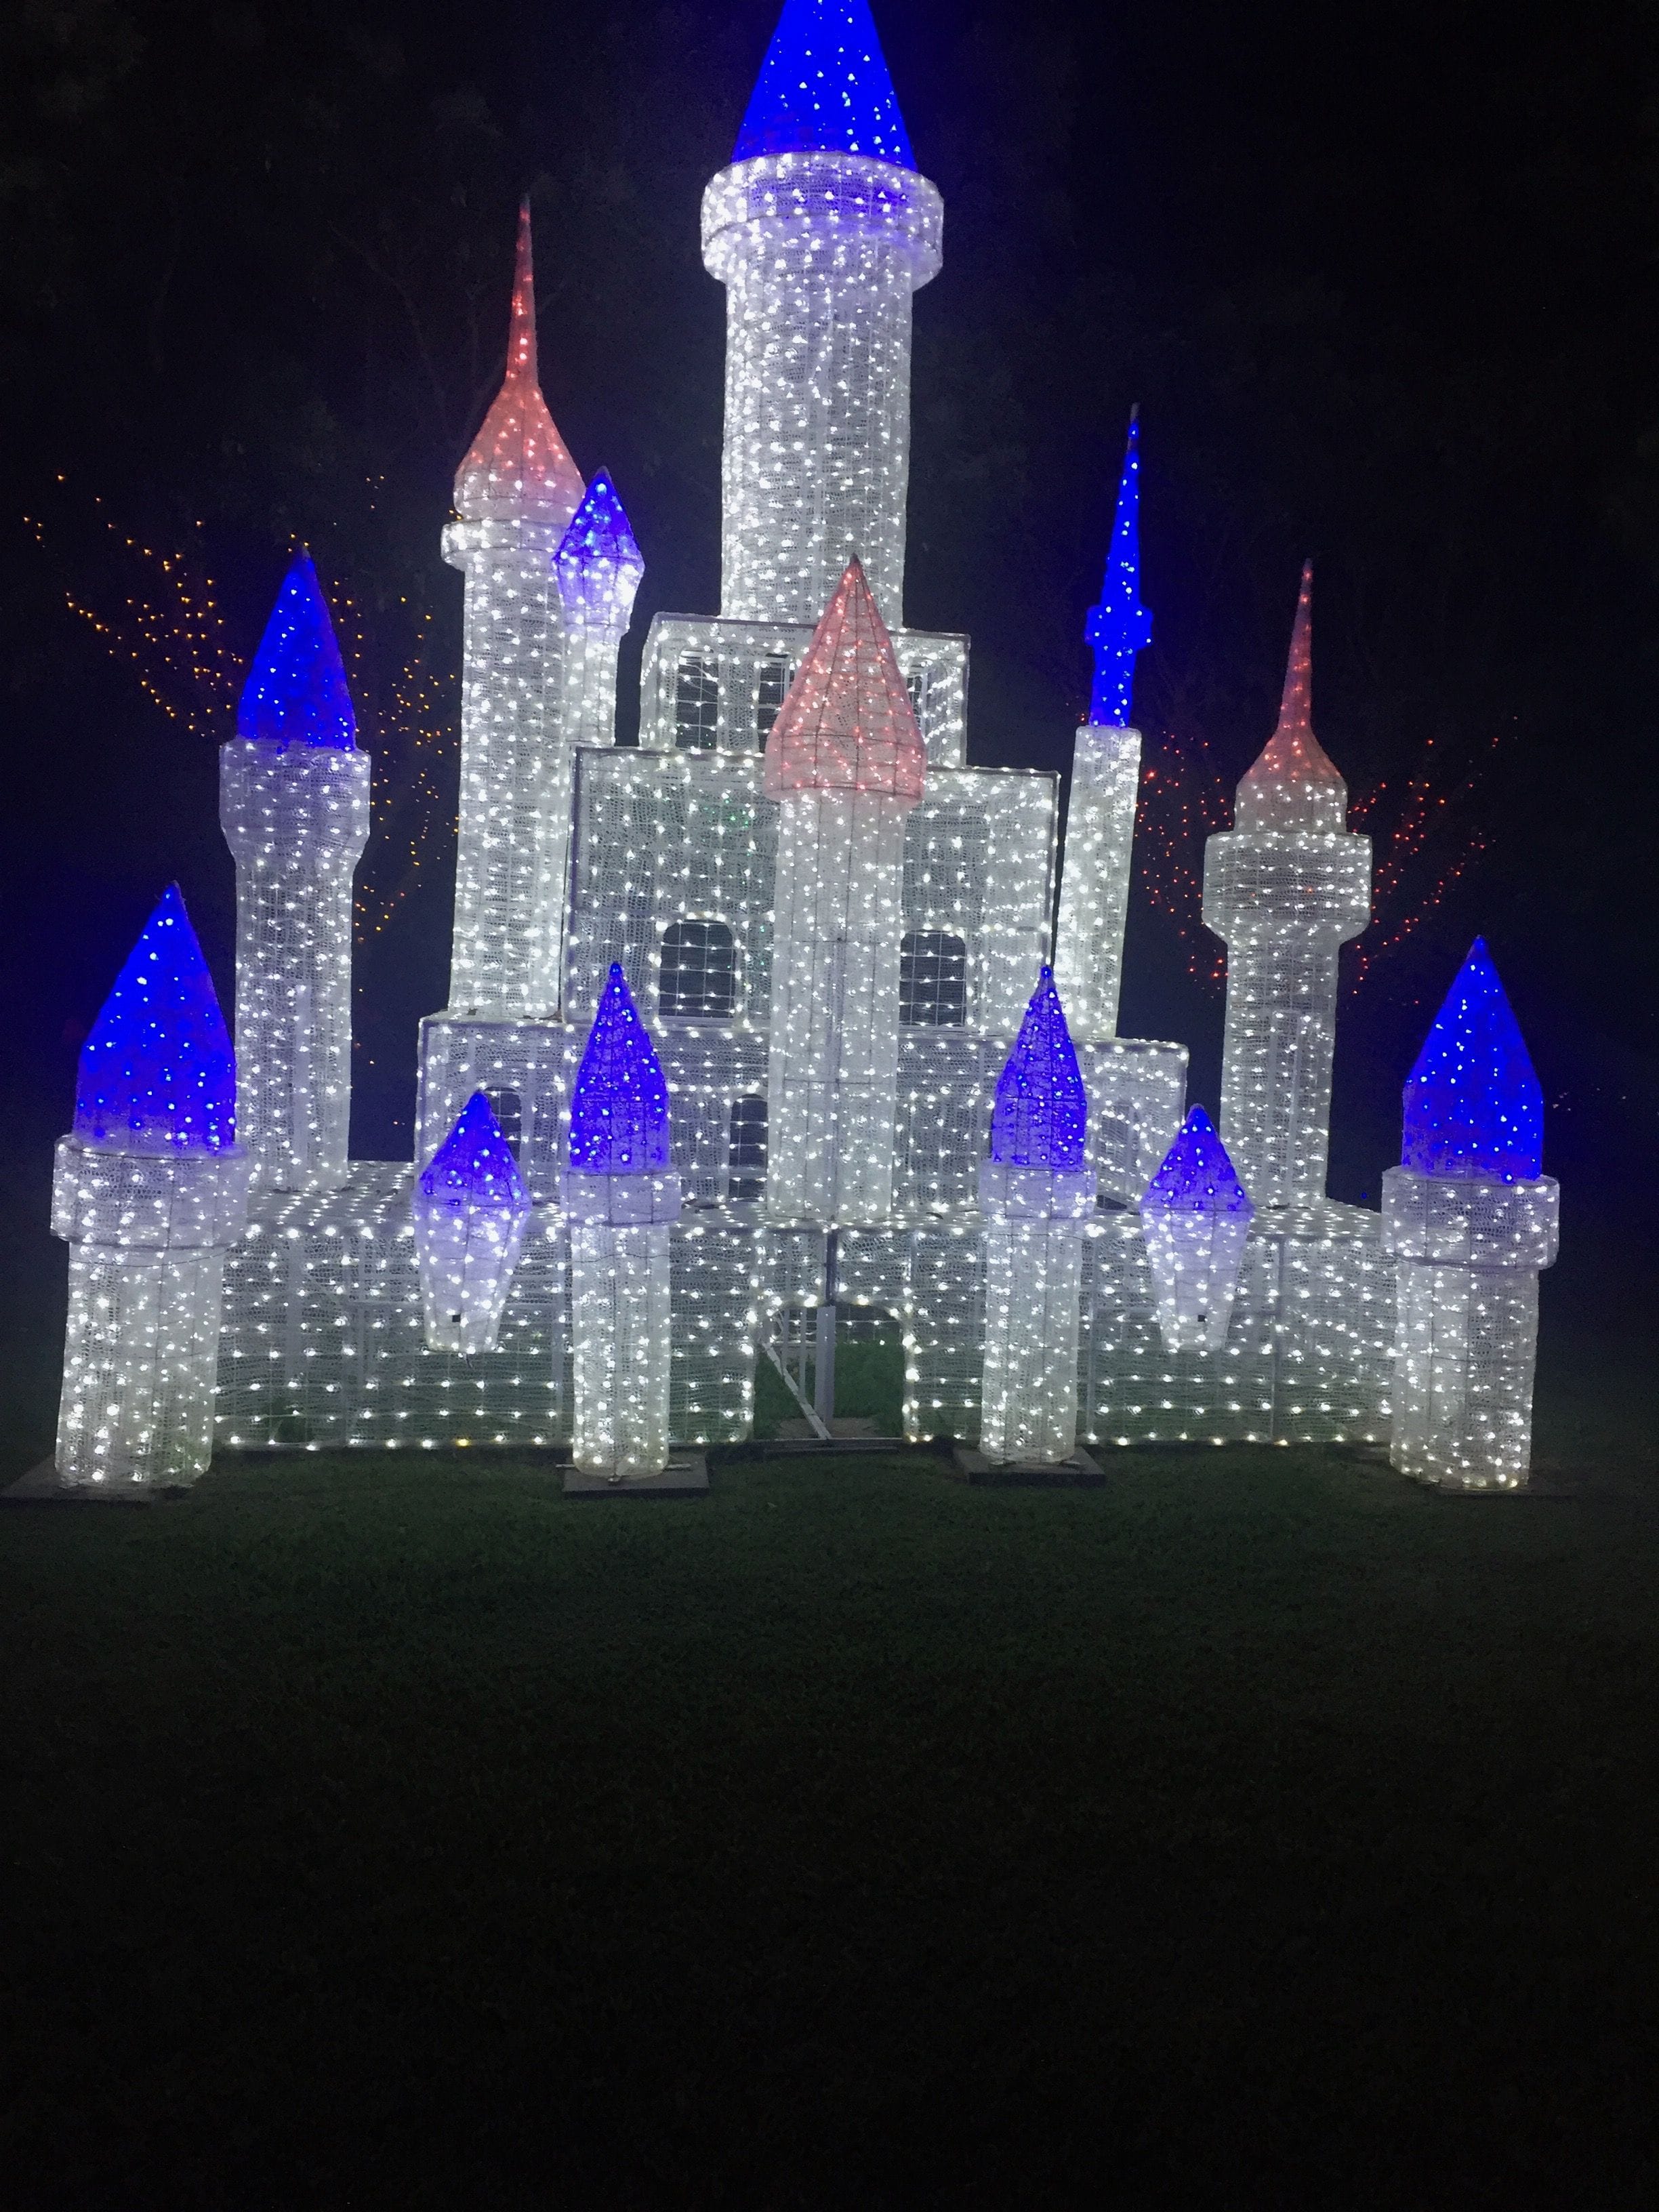 Hunter Valley Christmas Lights Spectacular Image -5b3abbe39d4ea